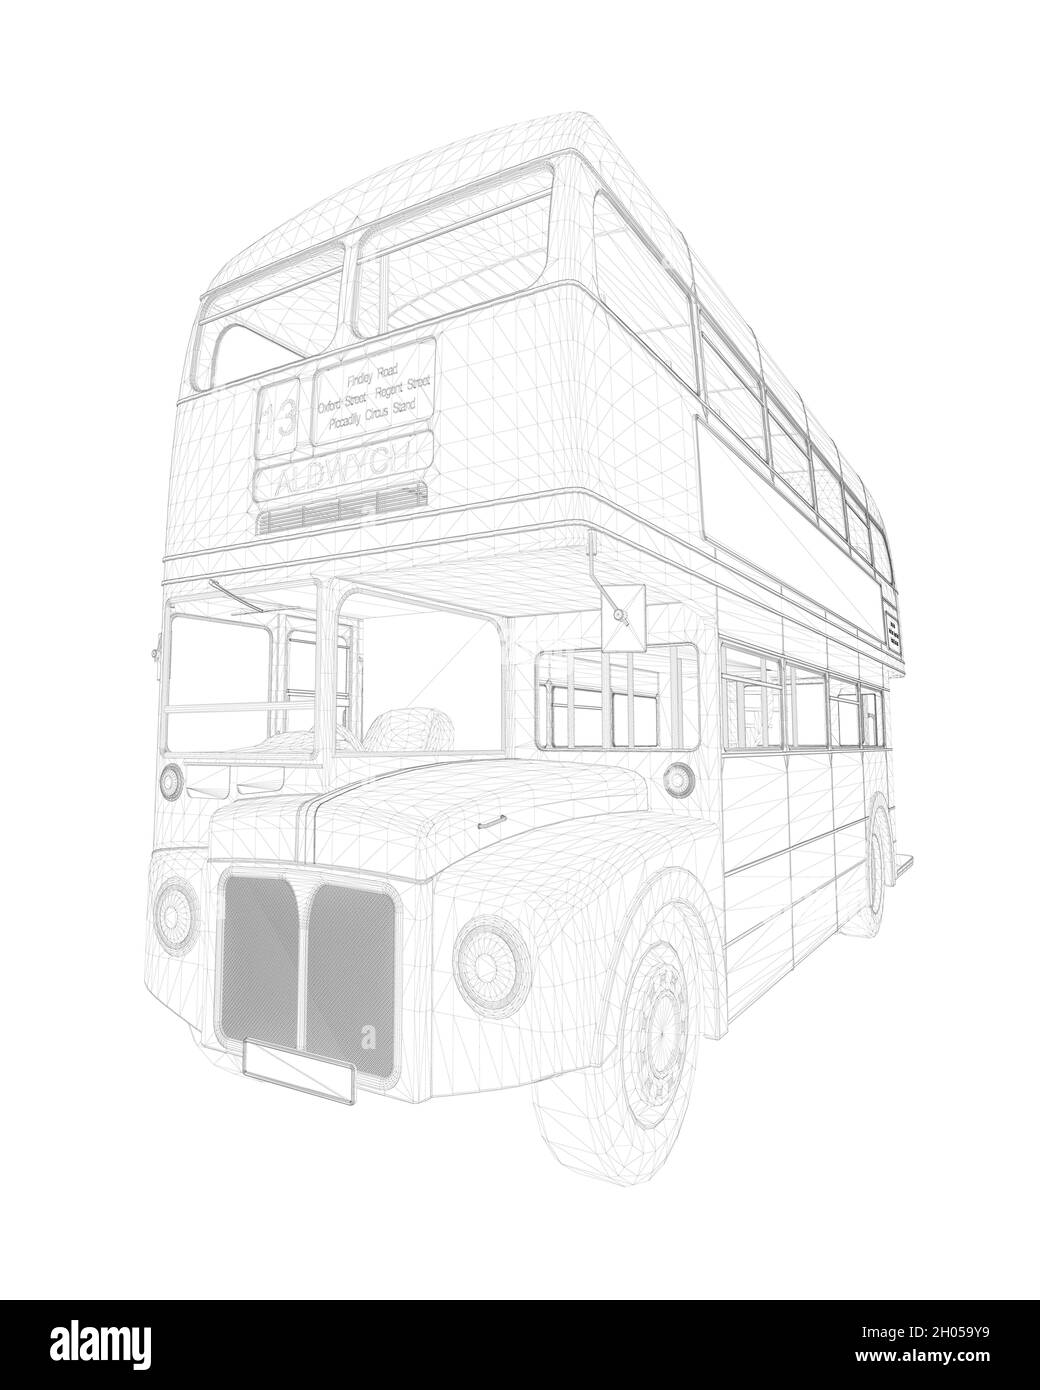 11260 Bus Sketch Drawing Images Stock Photos  Vectors  Shutterstock